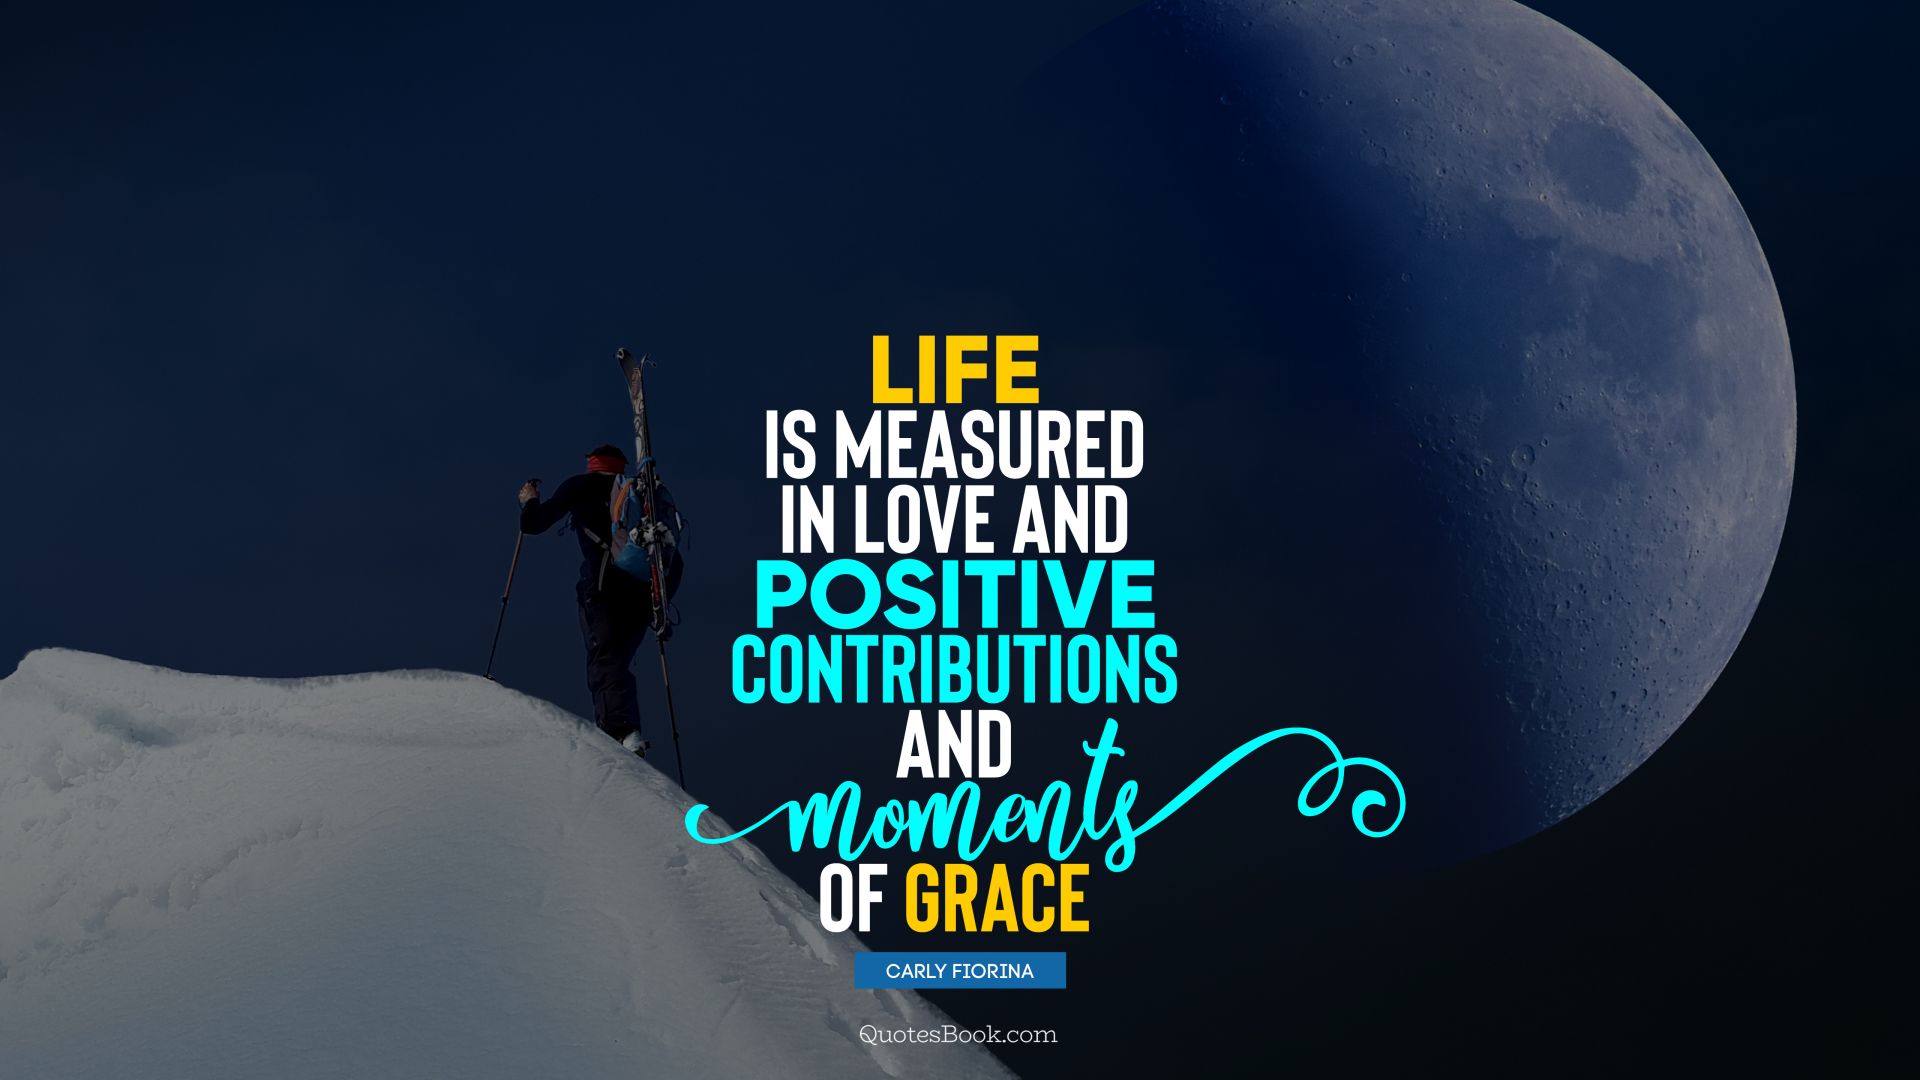 Life is measured in love and positive contributions and moments of grace. - Quote by Carly Fiorina